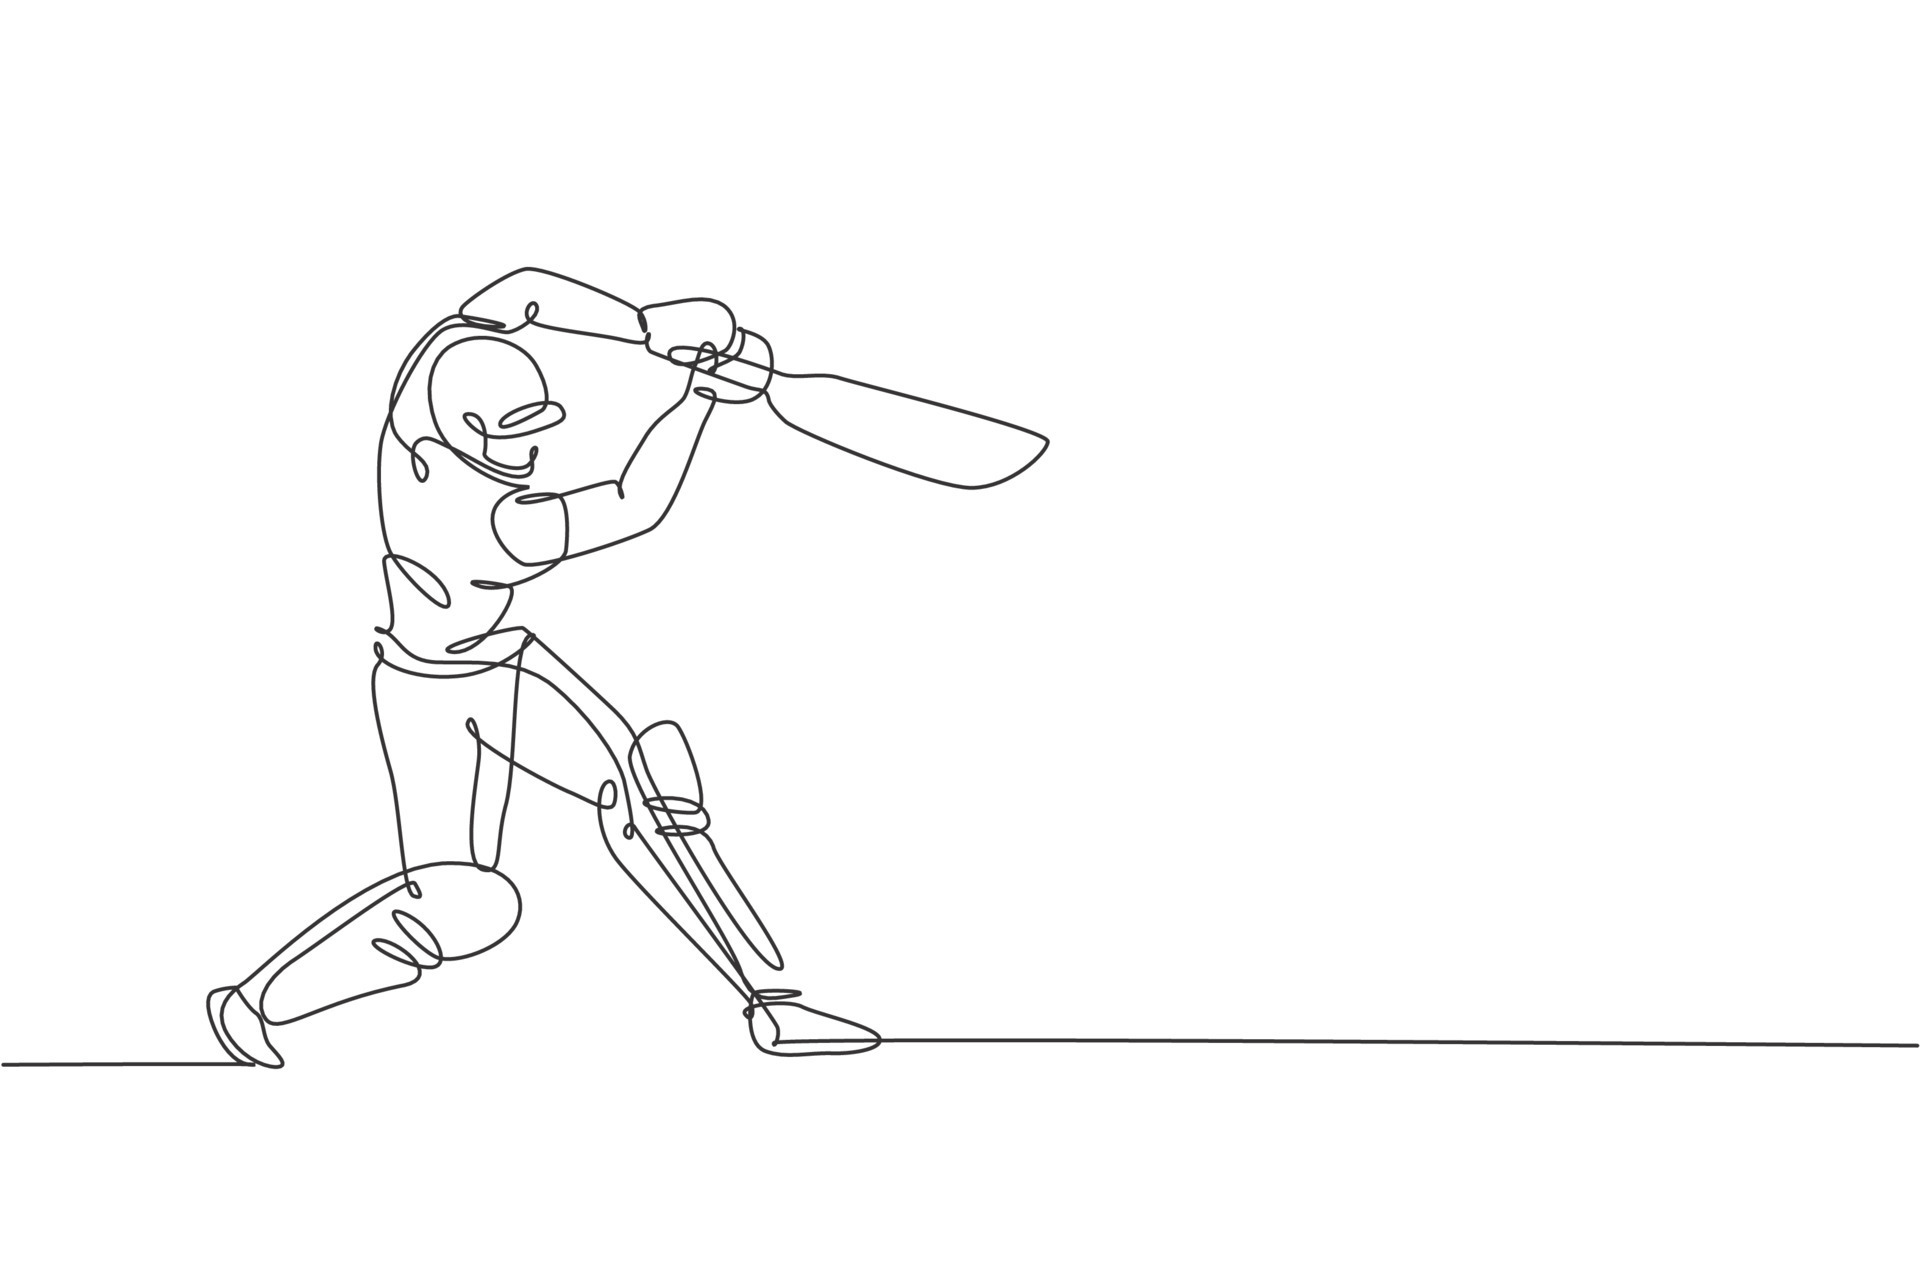 Learn How to Draw a Cricket Player Scene Other Occupations Step by Step   Drawing Tutorials